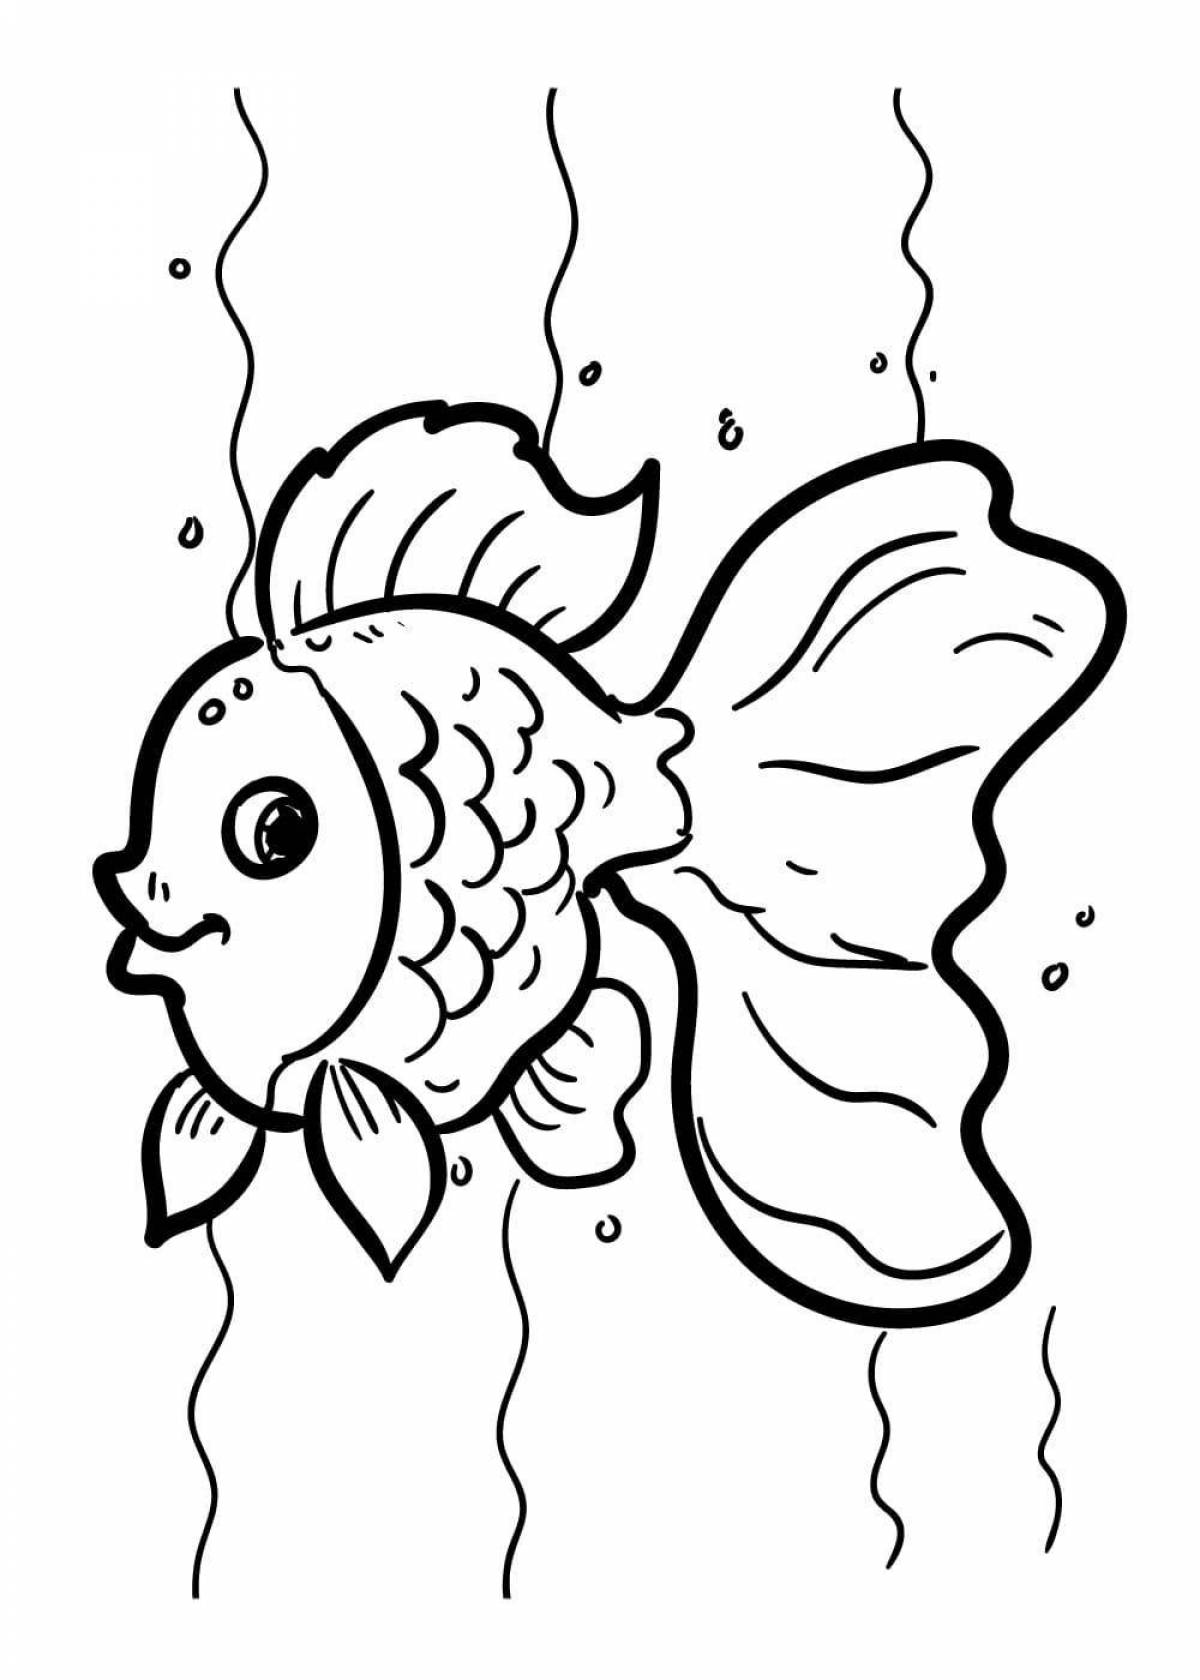 Bright coloring goldfish for children 3-4 years old